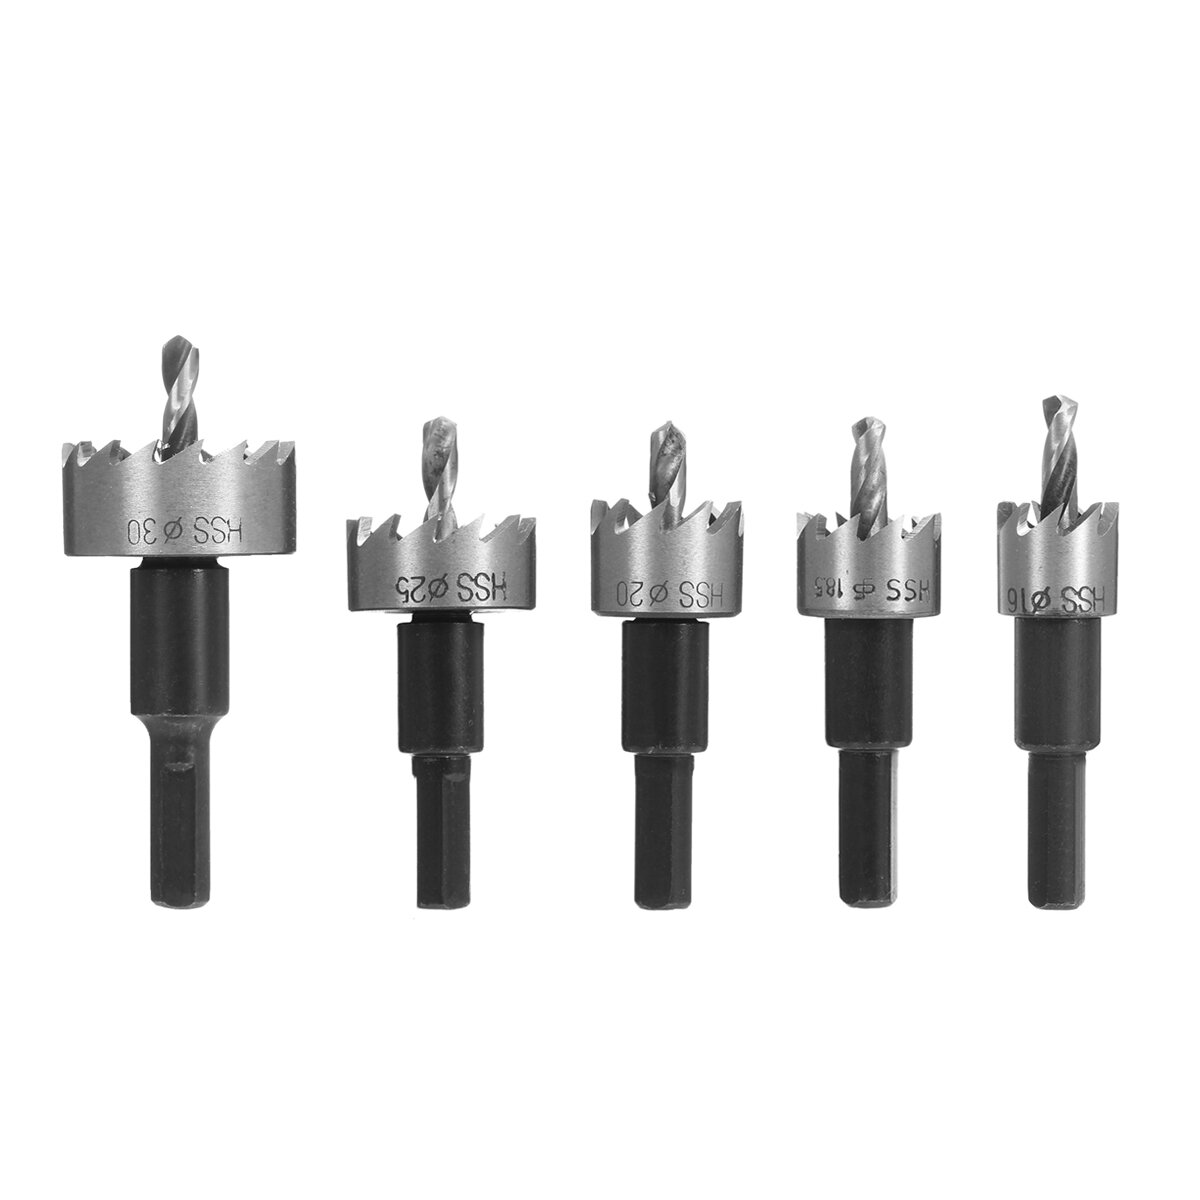 5Pcs Saw Tooth HSS Drill Bit Hole Saw Set Stainless Steel Metal Alloy 16-30mm